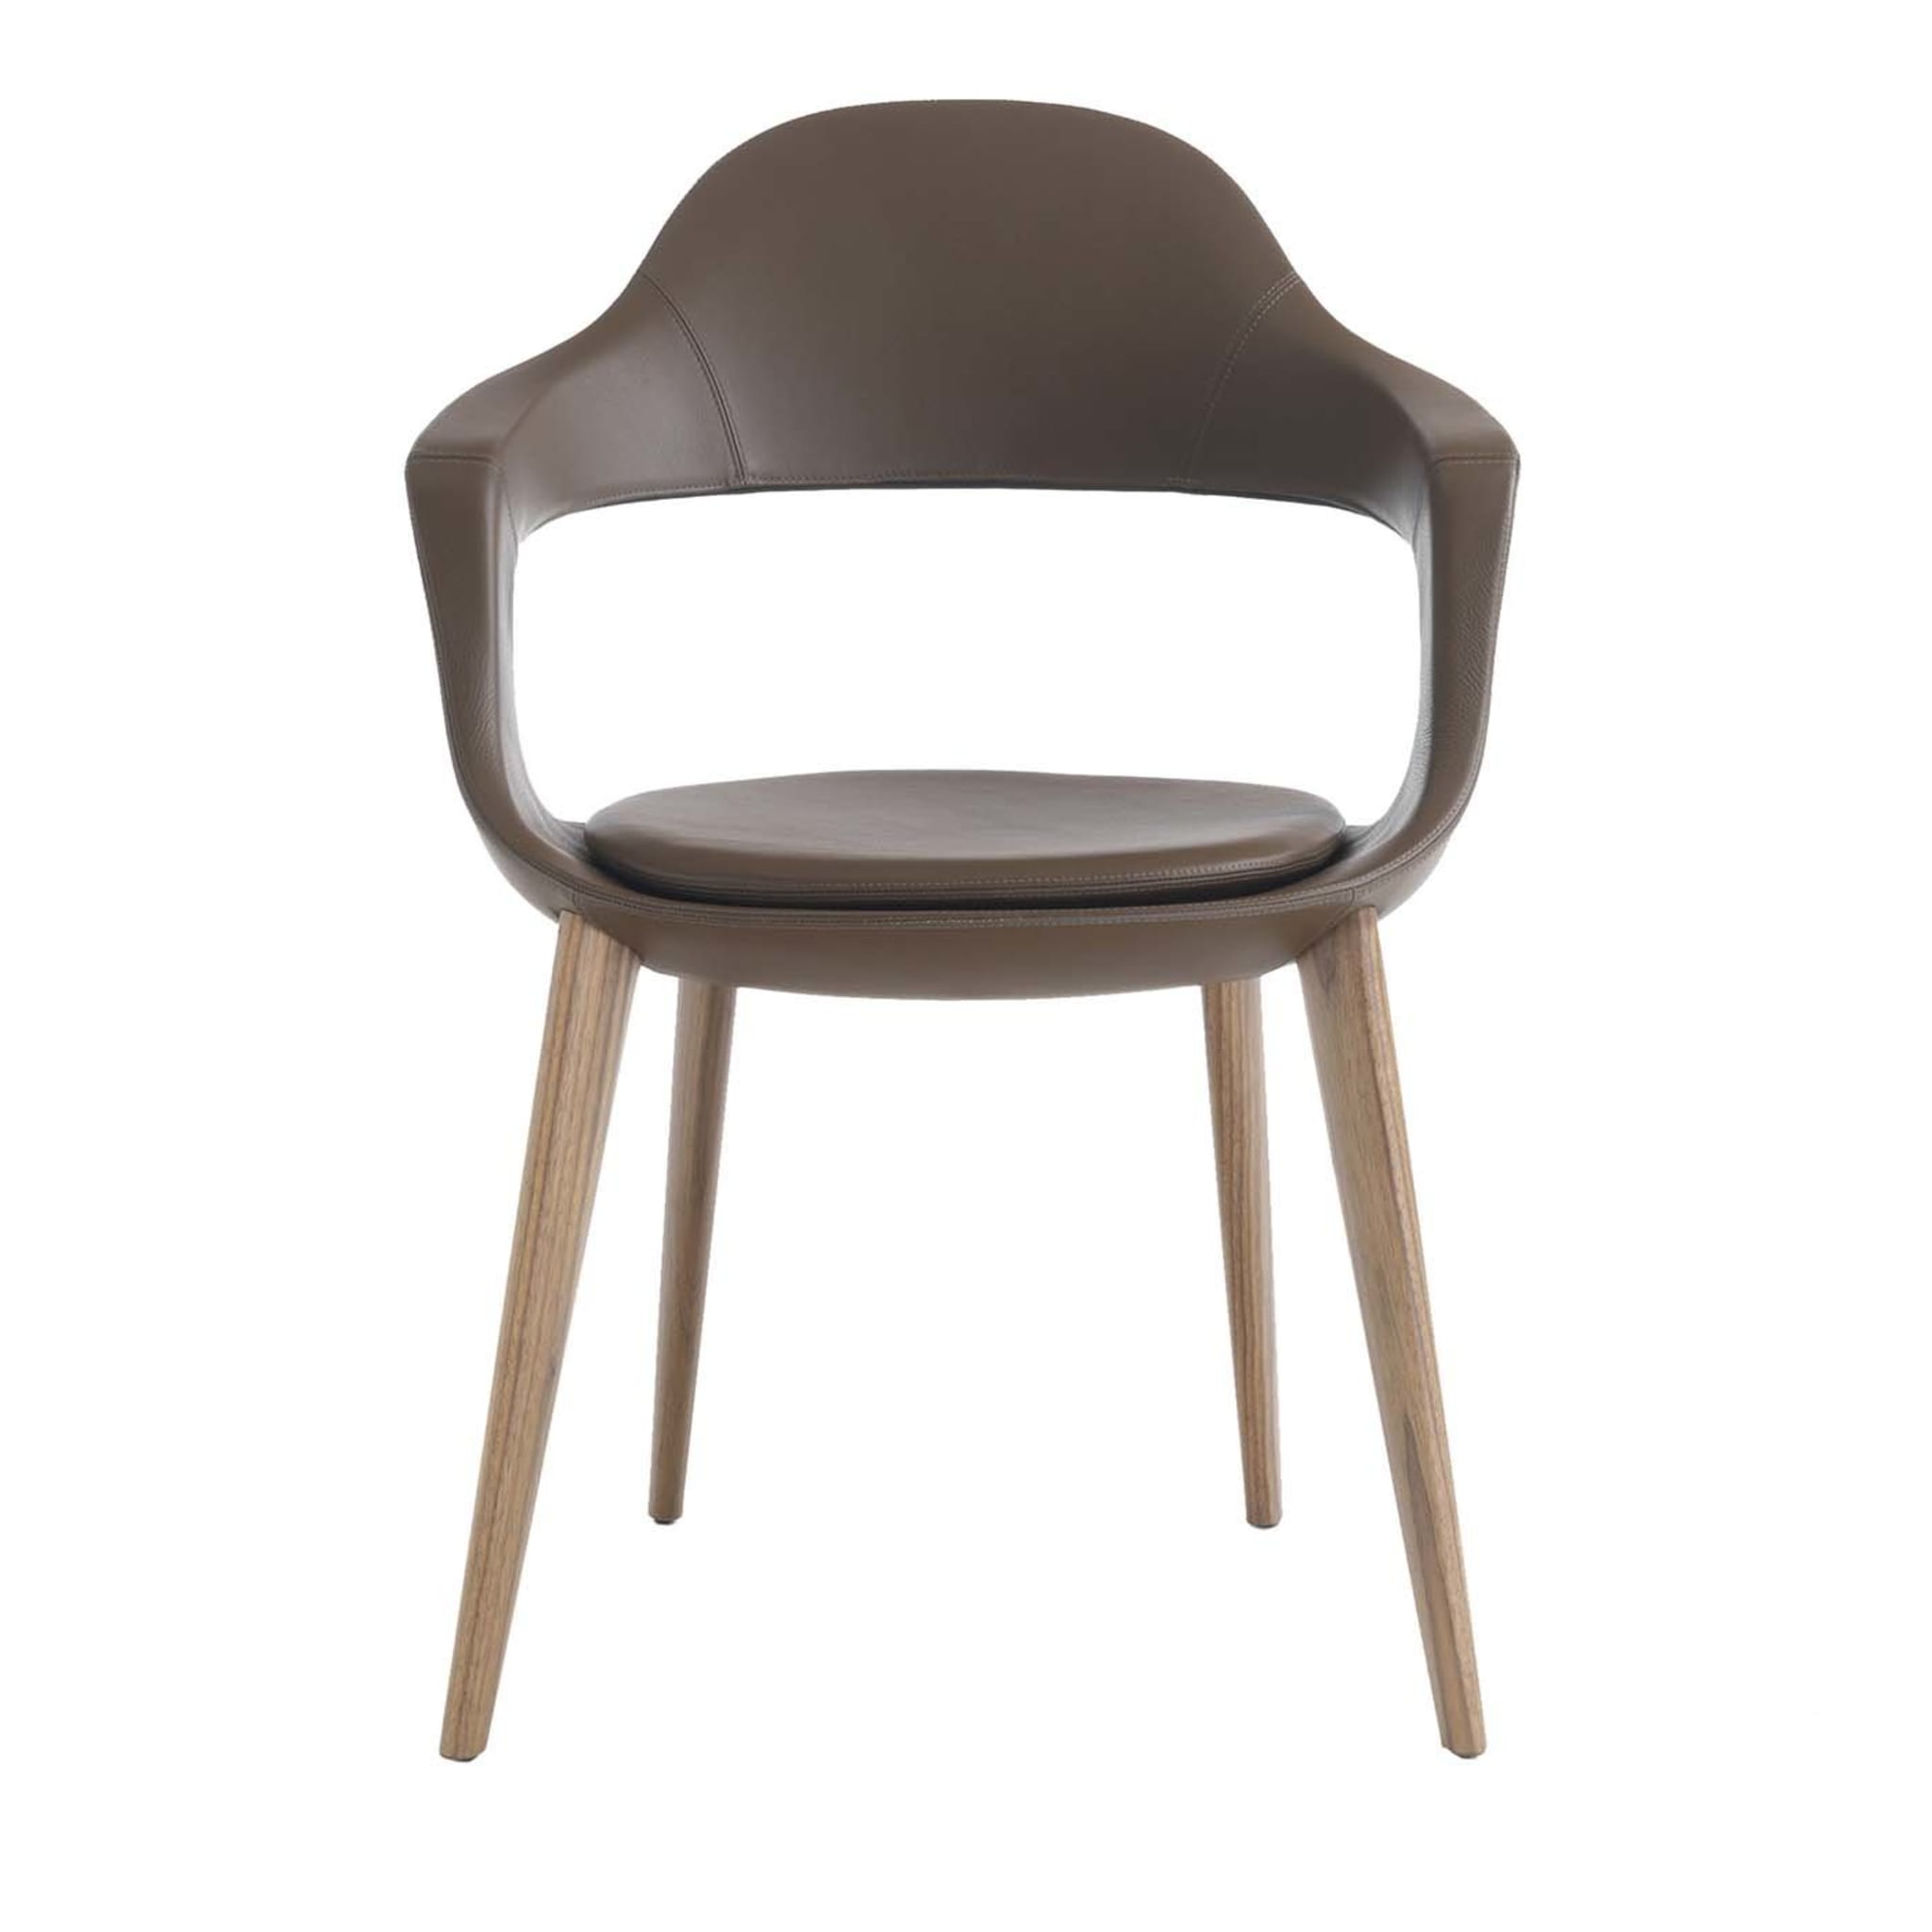 Frenchkiss High-Backed Wooden-Legged Chair by Stefano Bigi - Main view